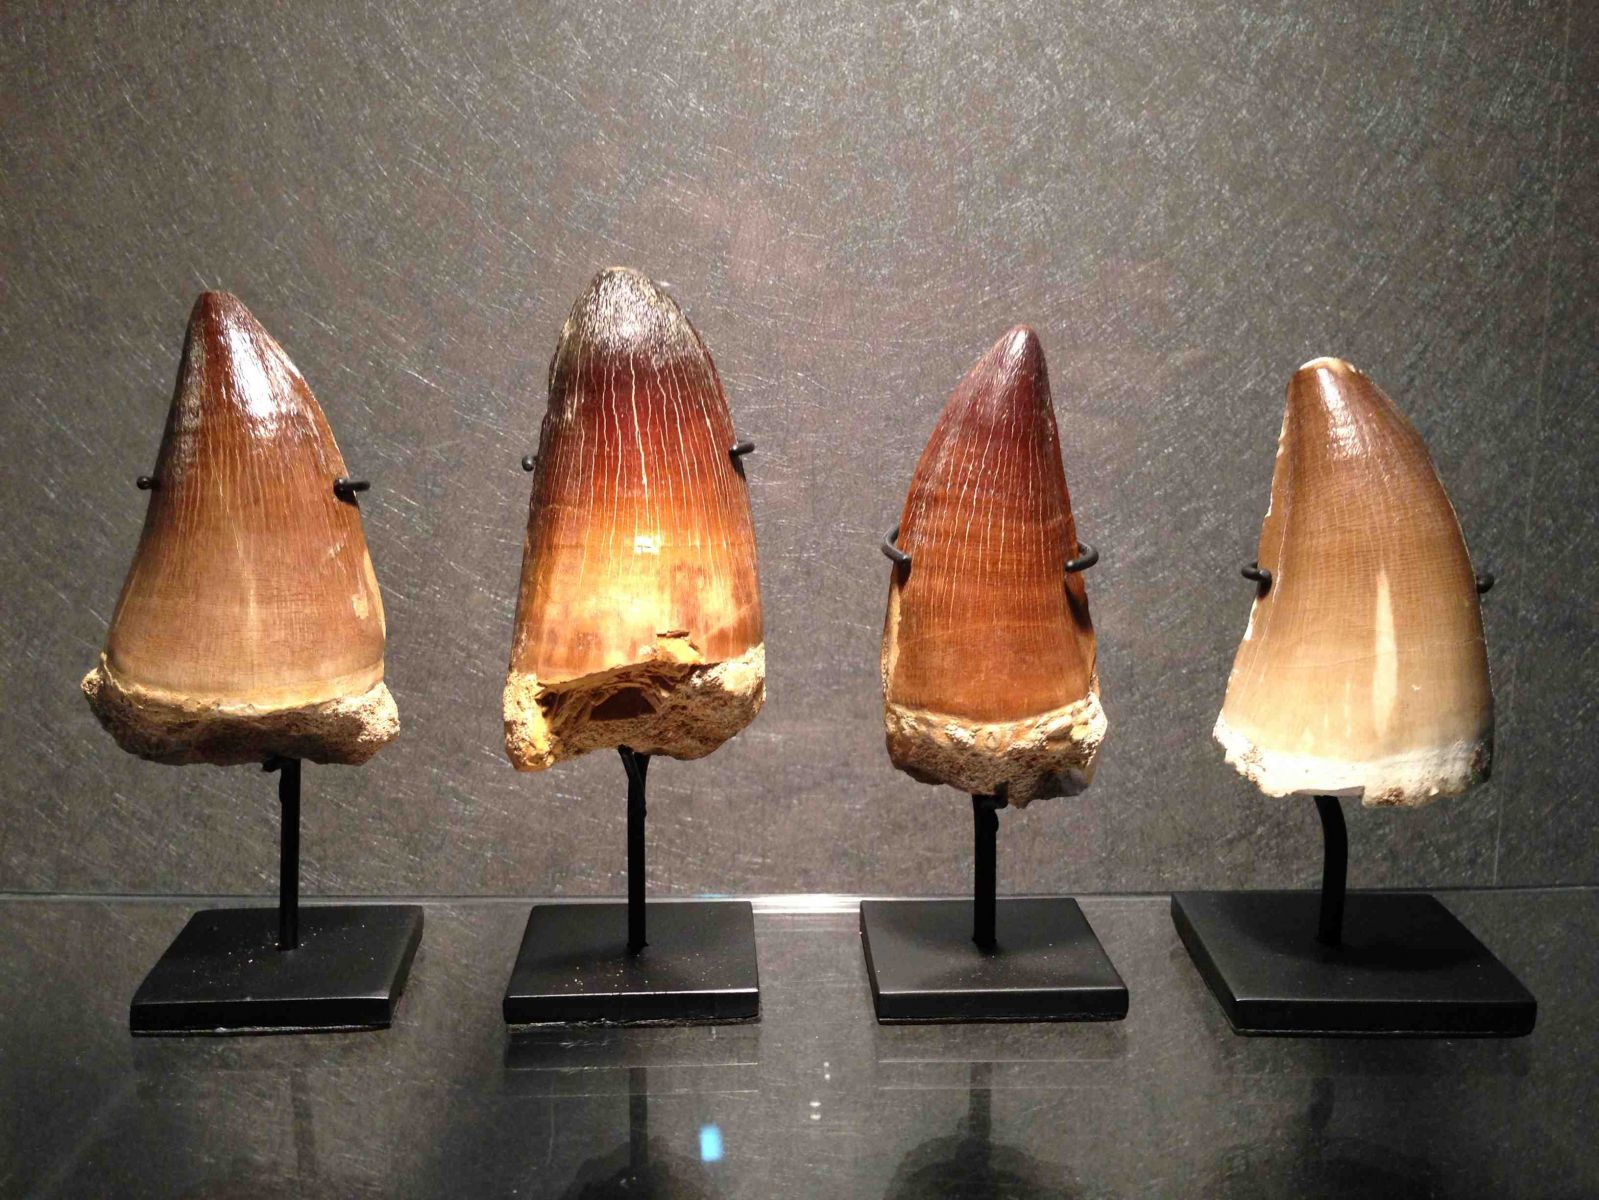 Mosasaur Large Teeth Crowns collection